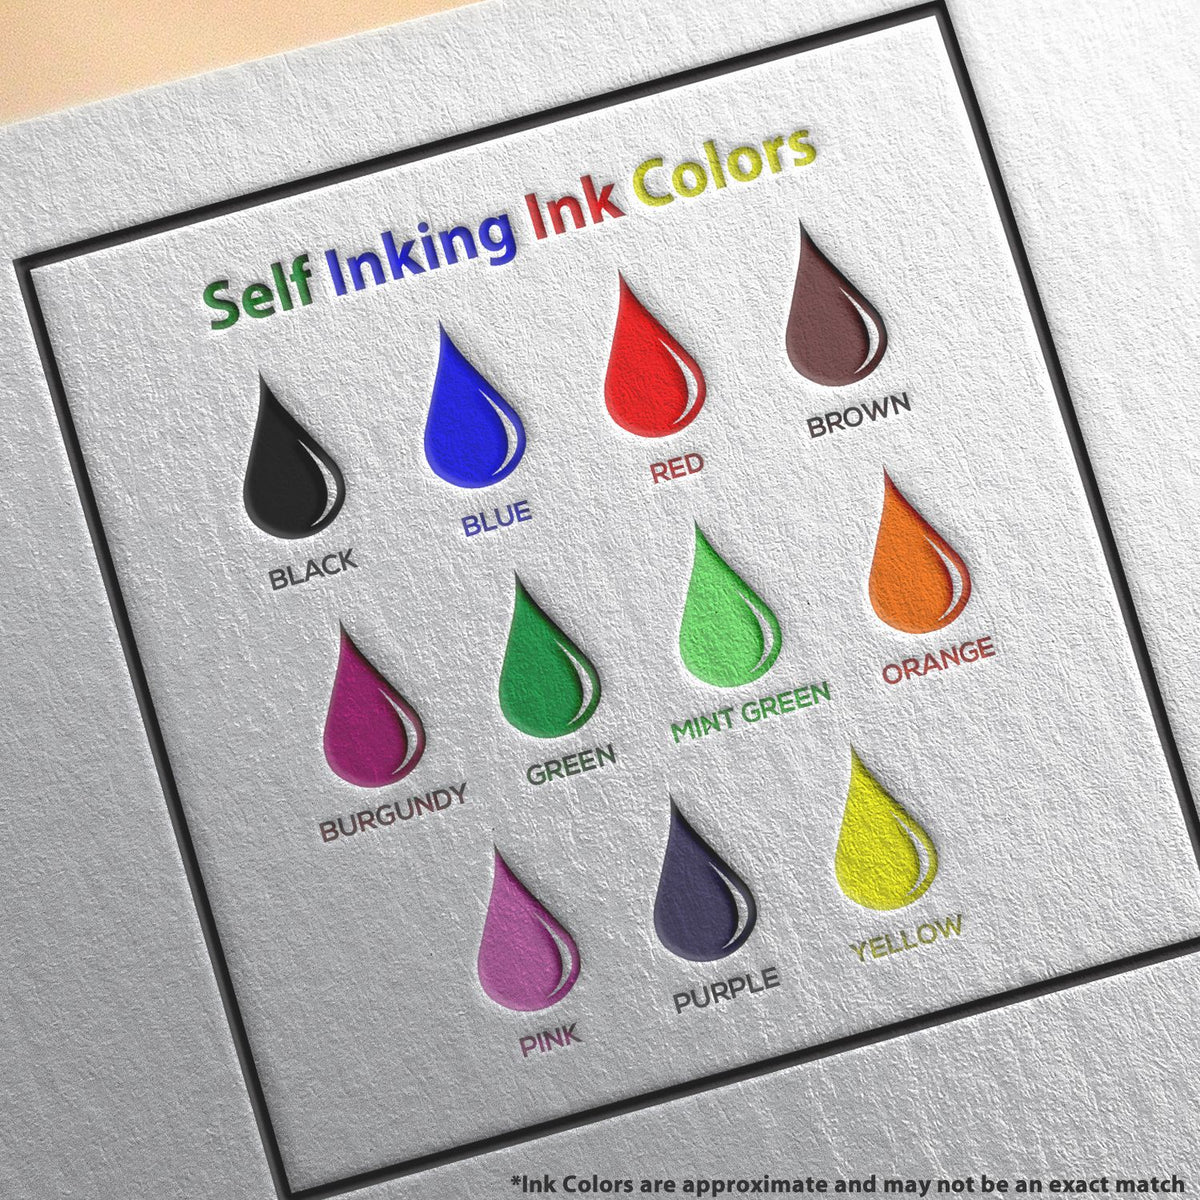 A picture showing the different ink colors or hues available for the Self-Inking Rectangular North Dakota Notary Stamp product.